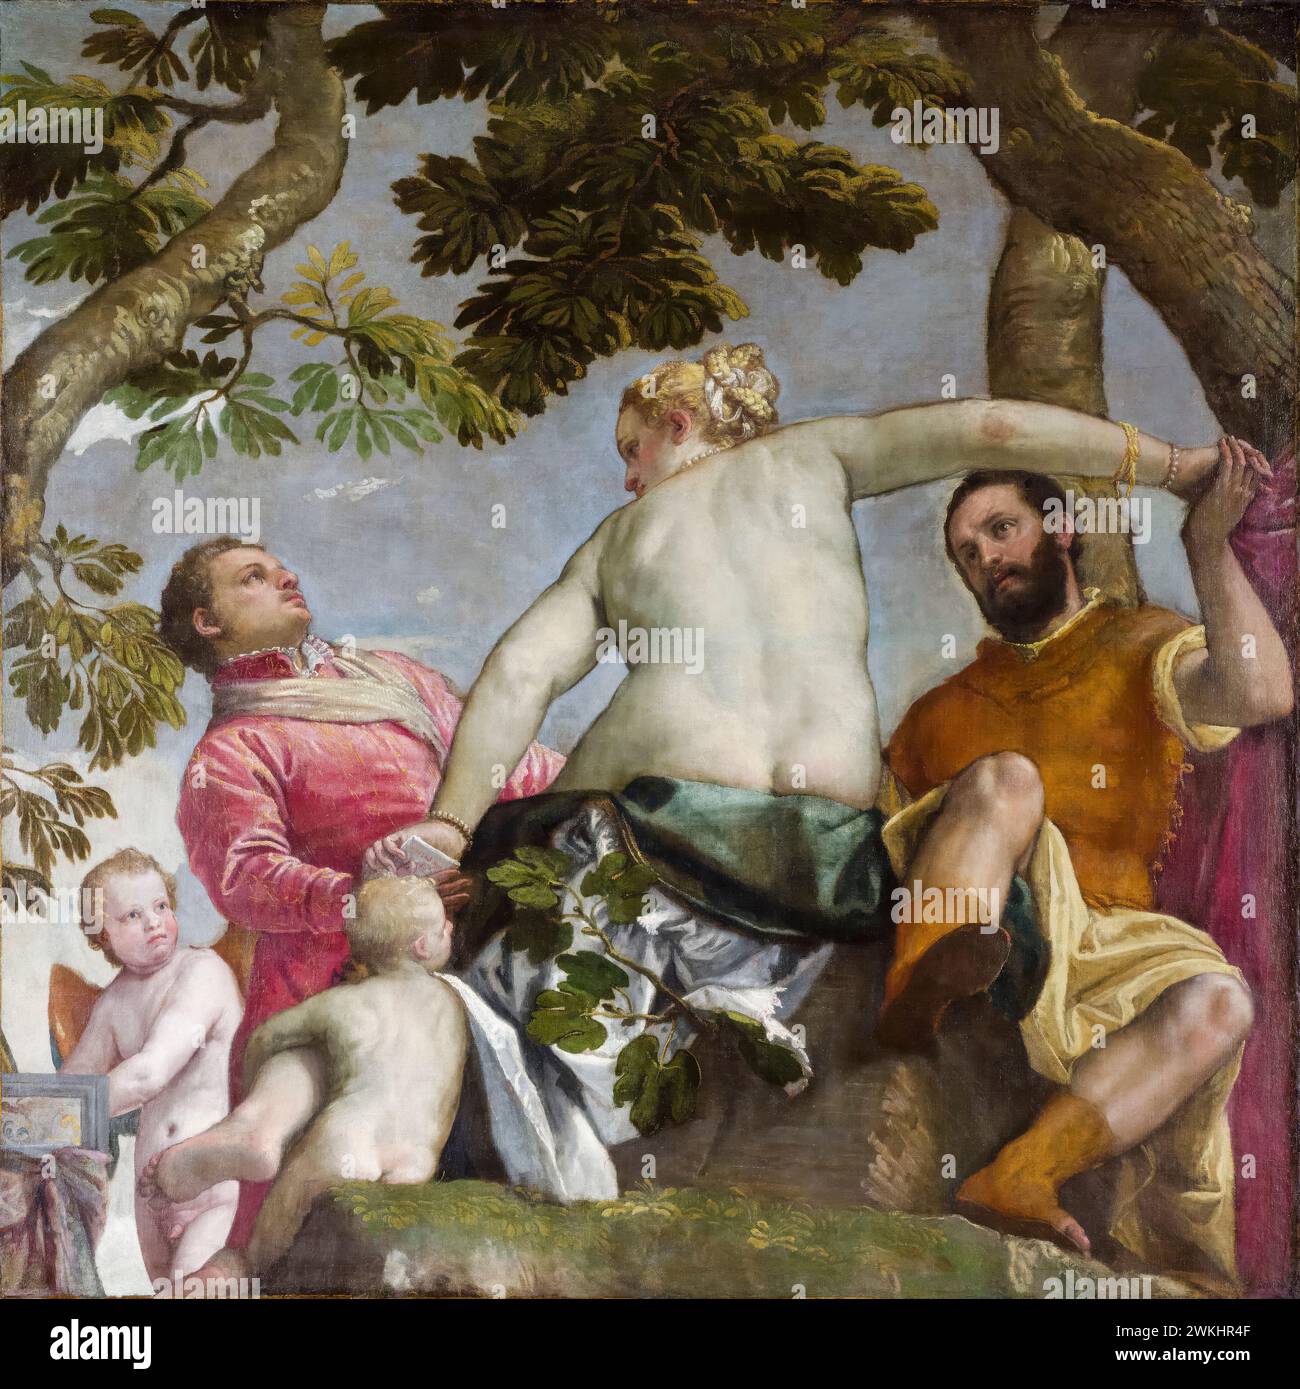 Paolo Veronese, Four Allegories of Love: Unfaithfulness, painting in oil on canvas, circa 1575 Stock Photo